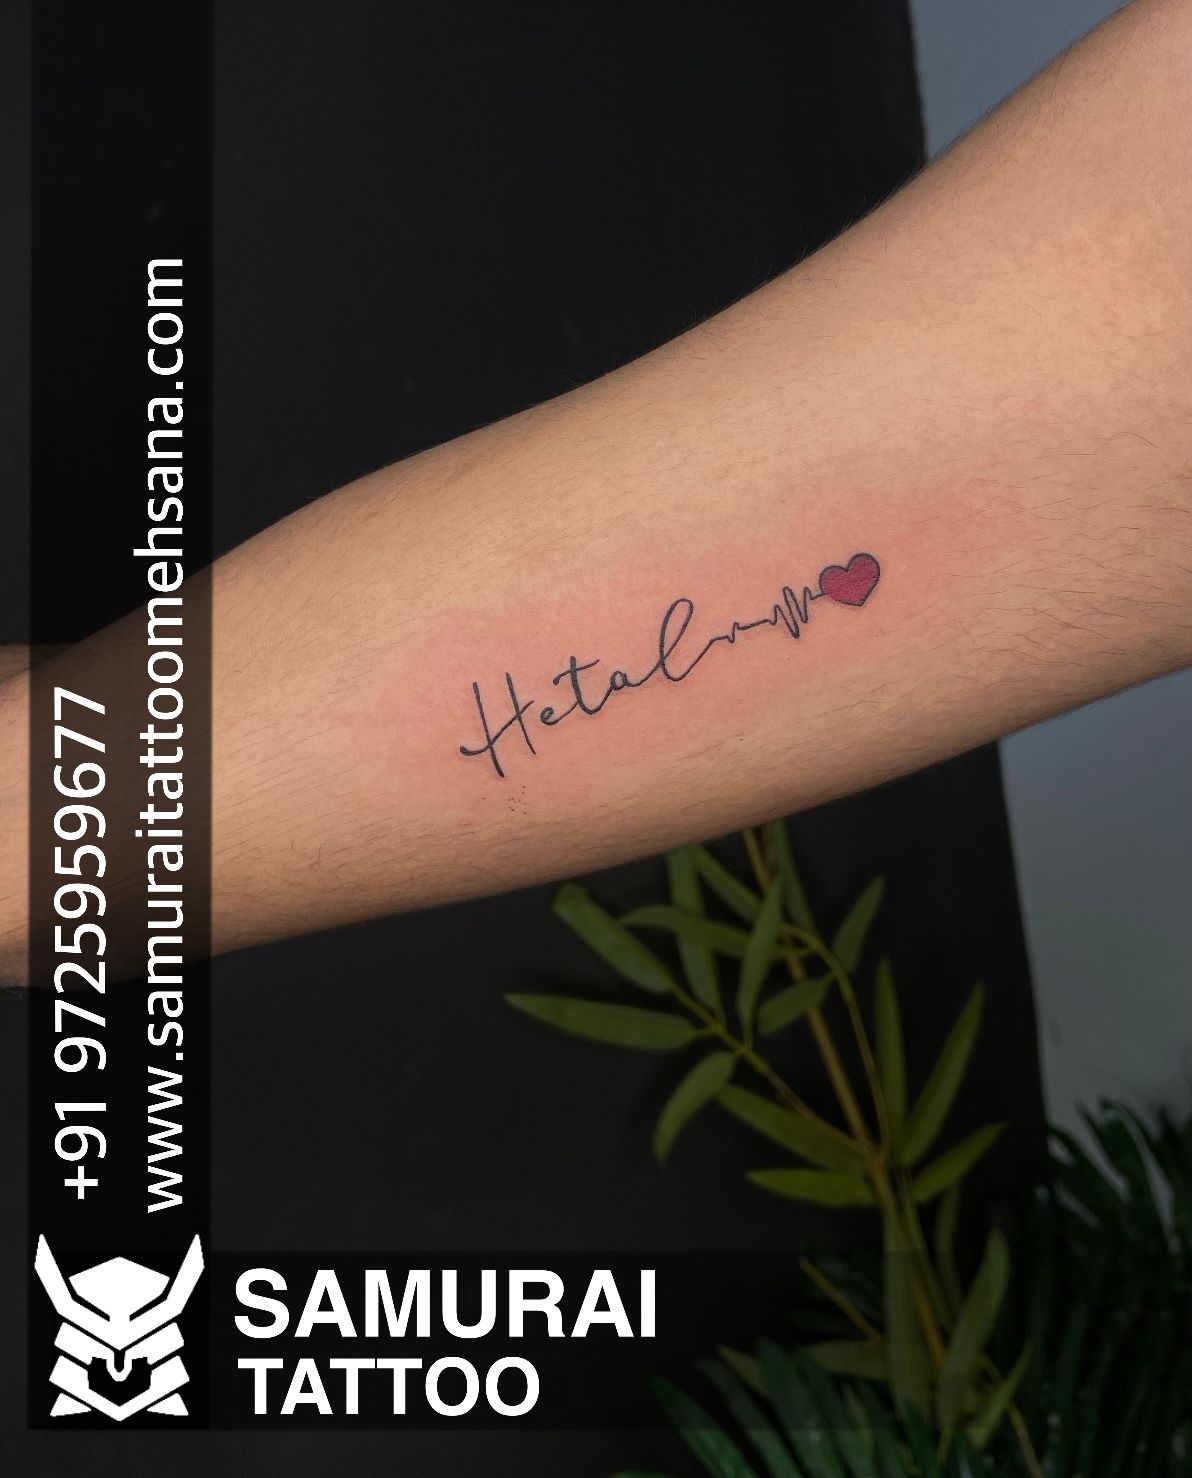 XPOSE TATTOOS JAIPUR on Twitter Name tattoo with crown Contact  917568000888 Website httpstcoB4fVFIUBor nametattoos name nameart  nametattoo crownstattoo crowntattoodesign besttattooshopinjaipur  besttattooartistinjaipur 